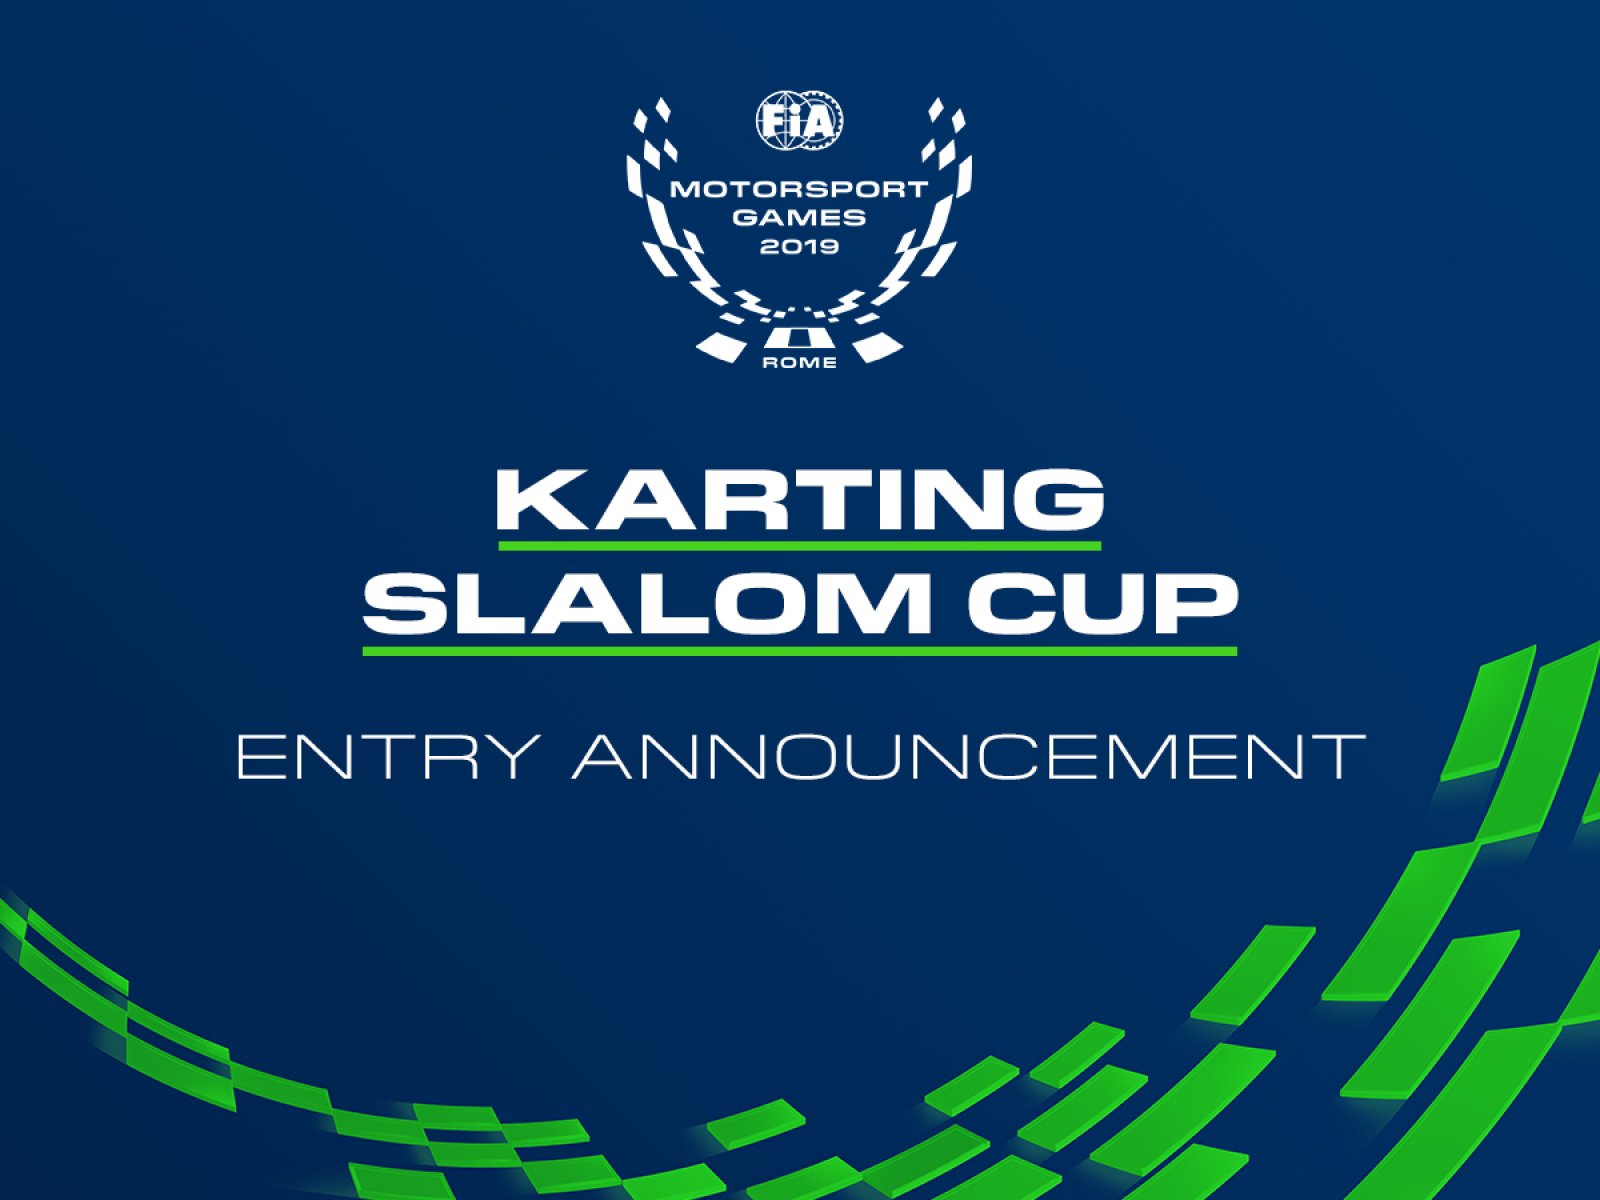 Karting Slalom Cup attracts strong initial entry for FIA Motorsport Games 